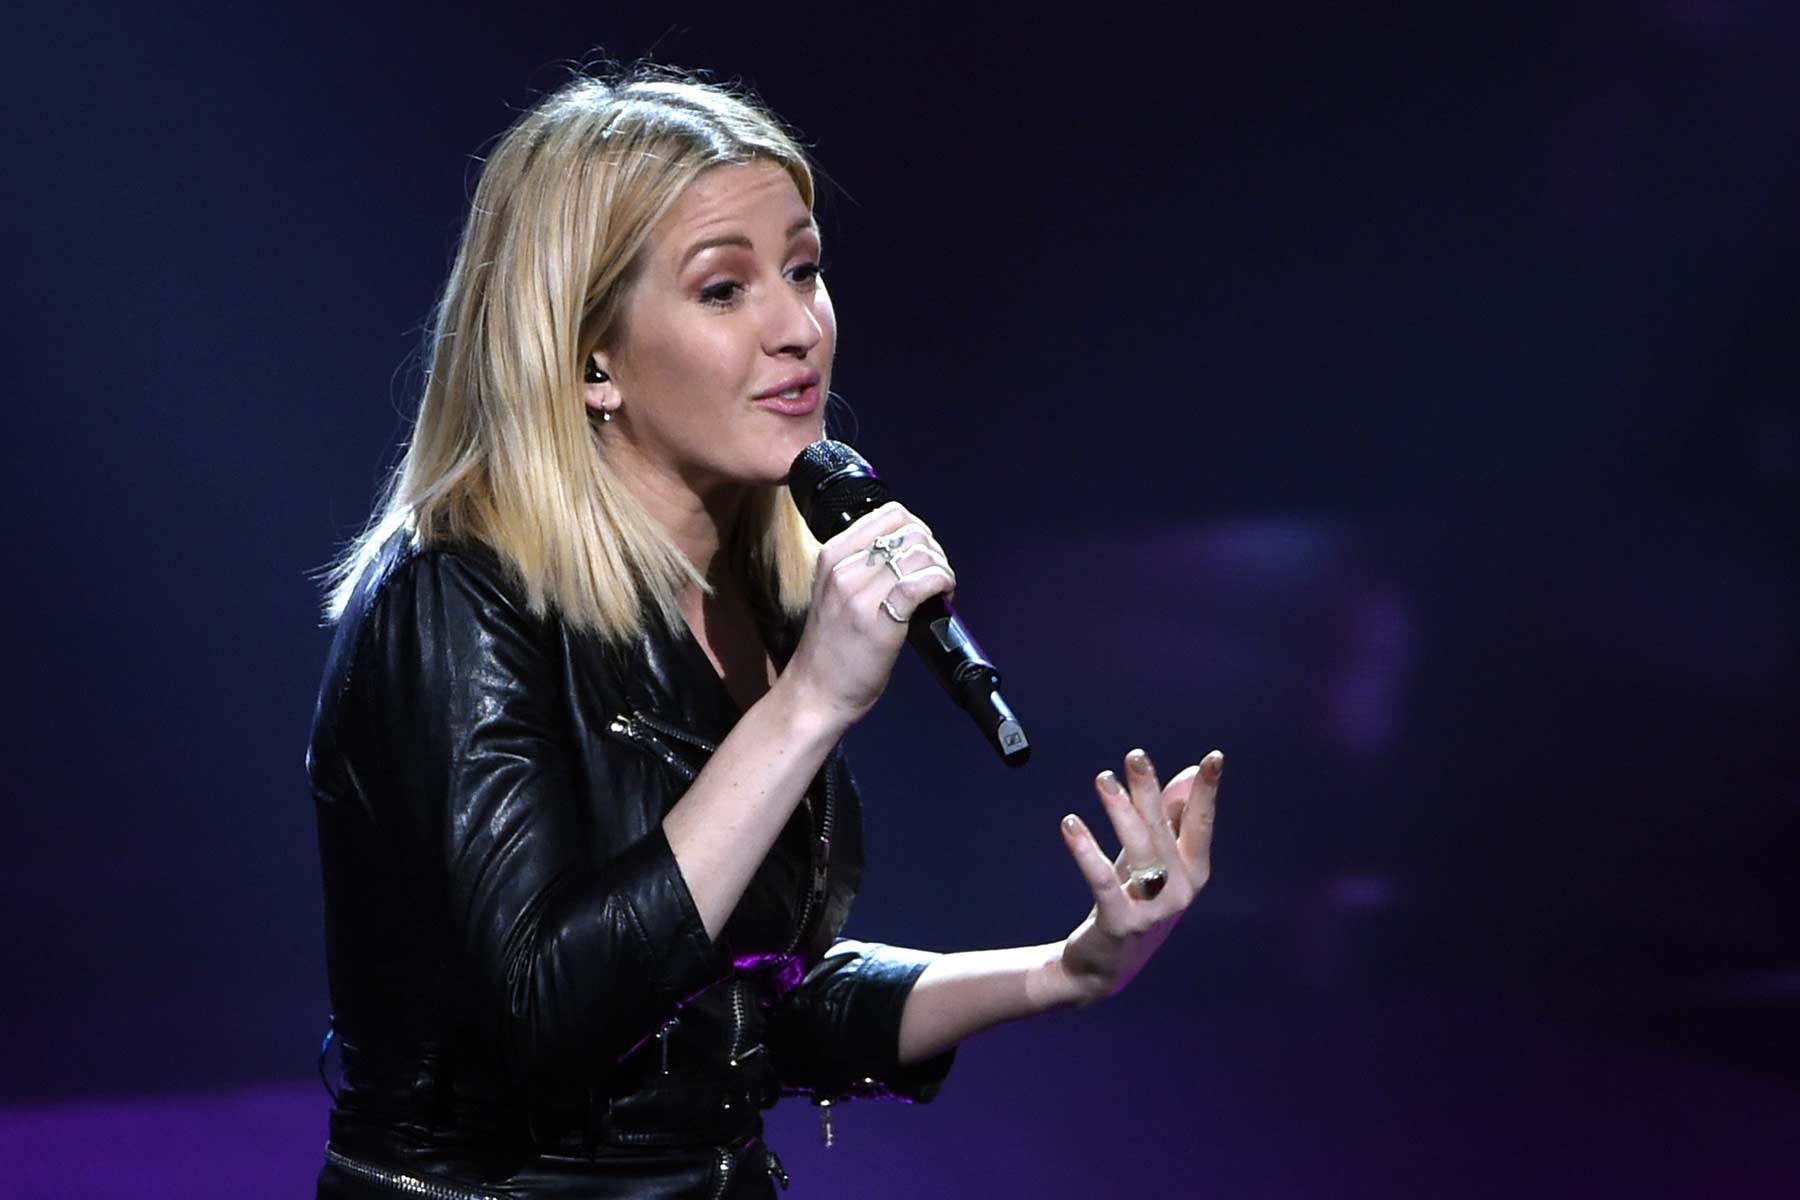 Ellie Goulding performing at The Voice of Holland